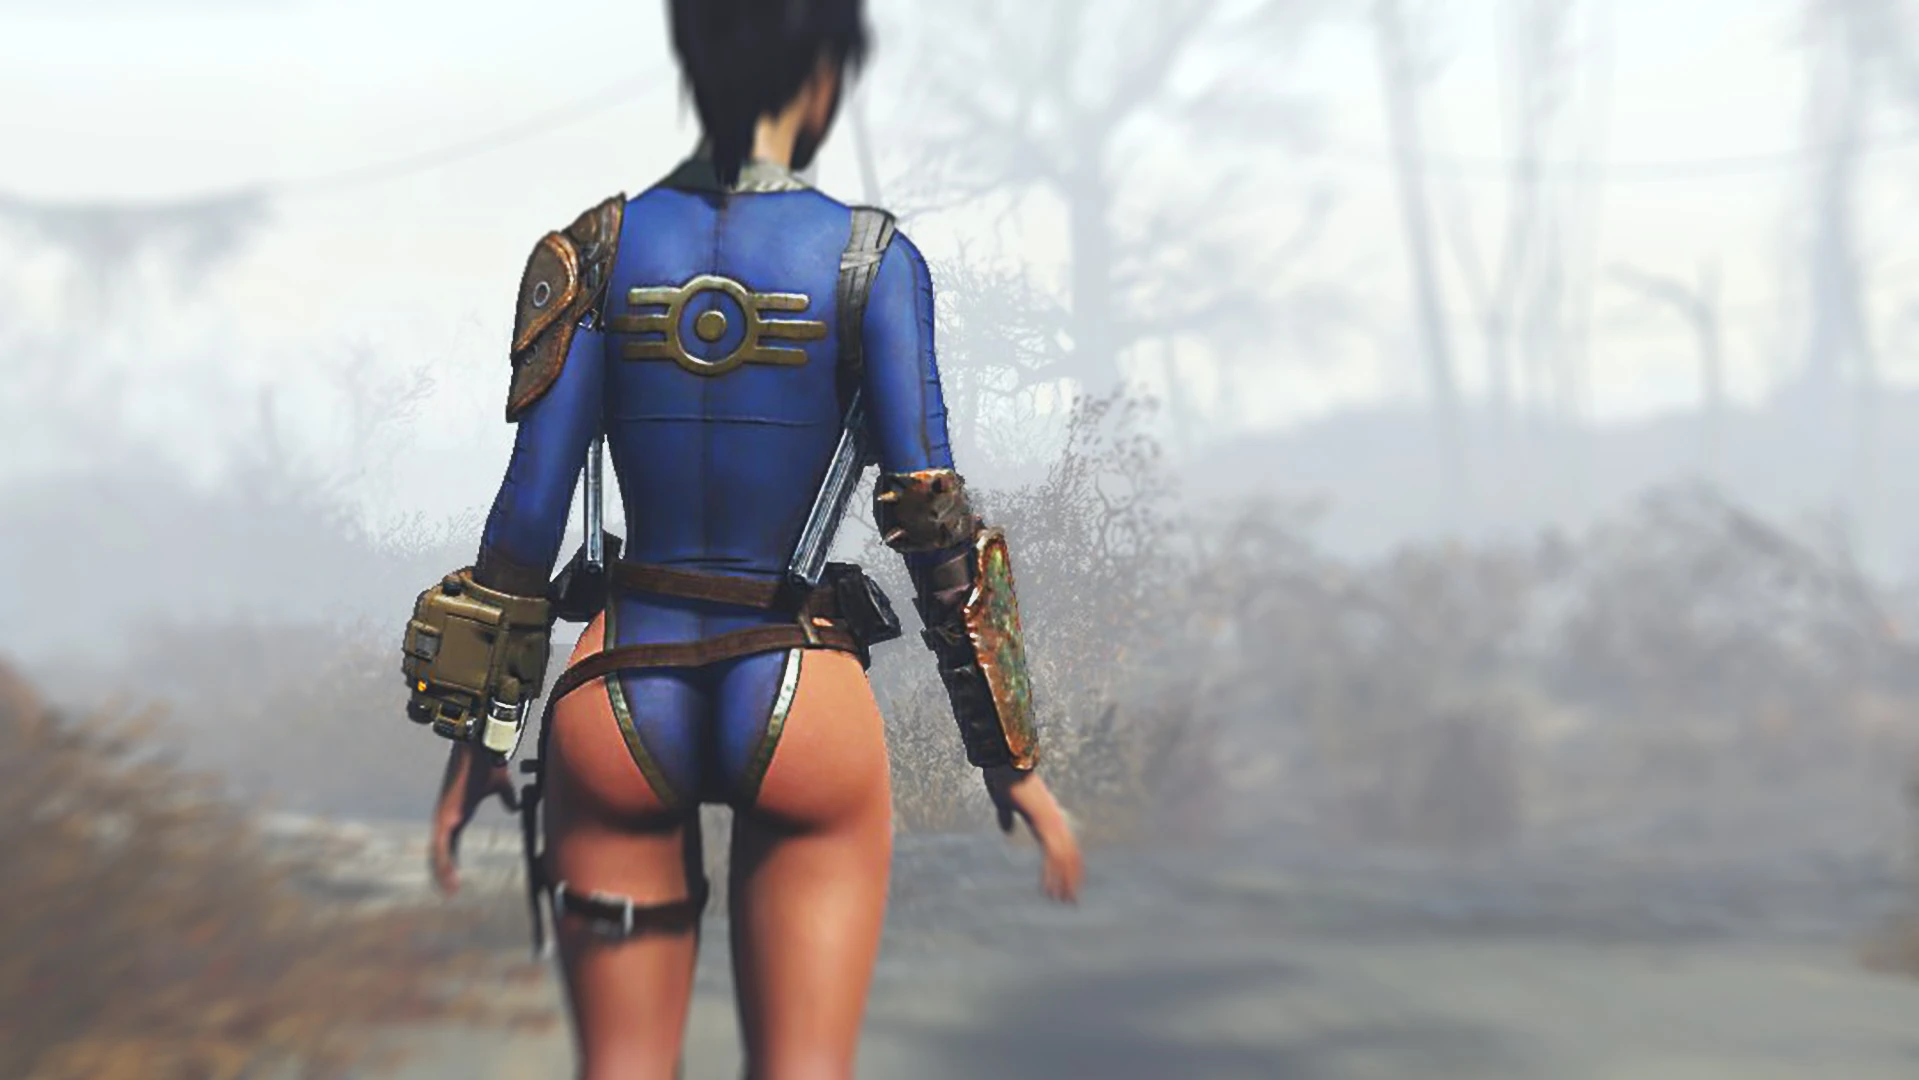 More information about "Armored Leotard - Ultimate Nuka Sweetroll Edition"